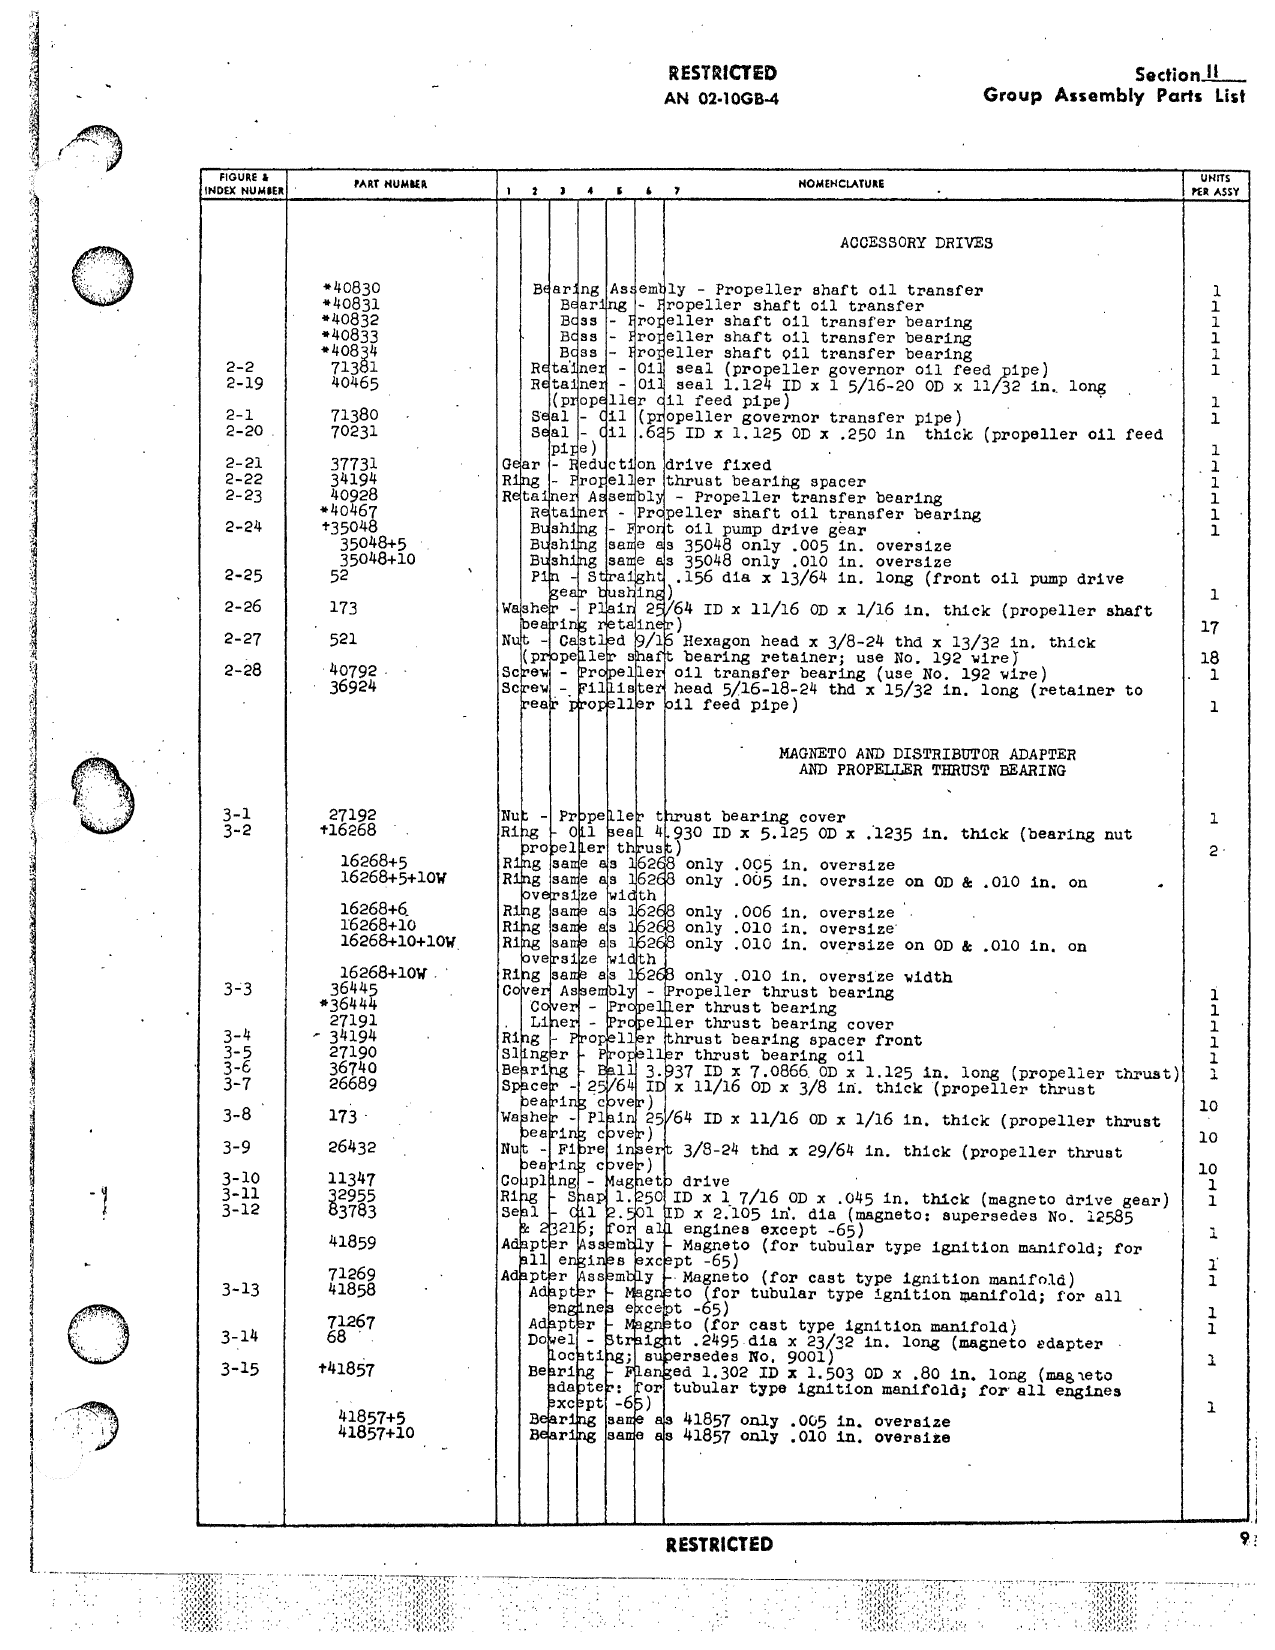 Sample page 13 from AirCorps Library document: Parts Catalog for Aircraft Engine Models R-2800-8, -8W, -10, -10W, and -65 